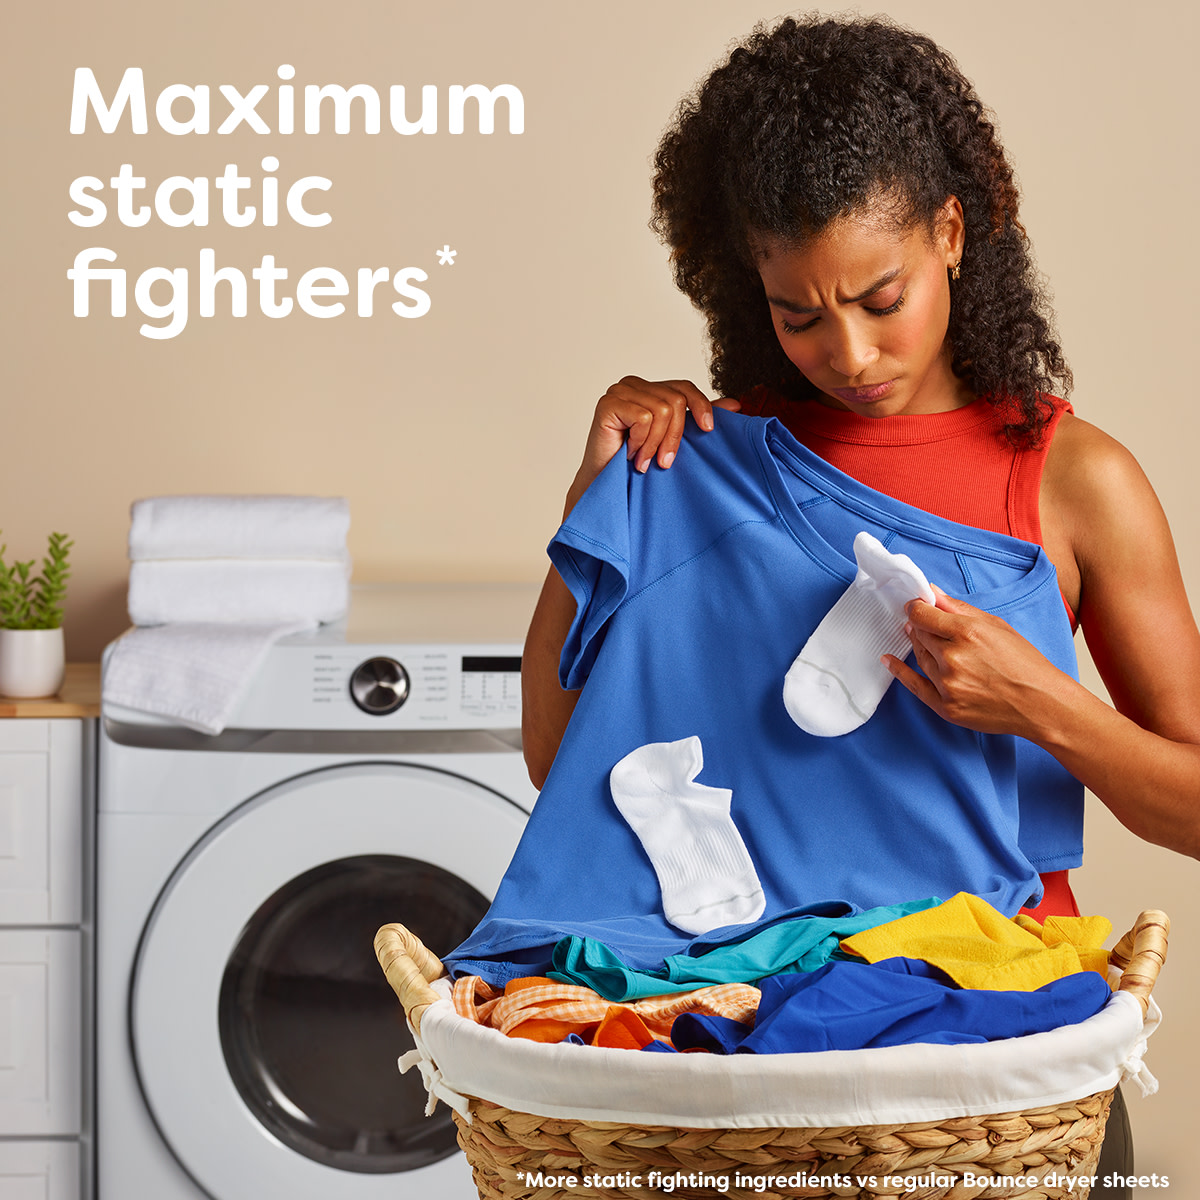 Bounce Lasting Fresh Dryer Sheets benefits: Maximum static fighters